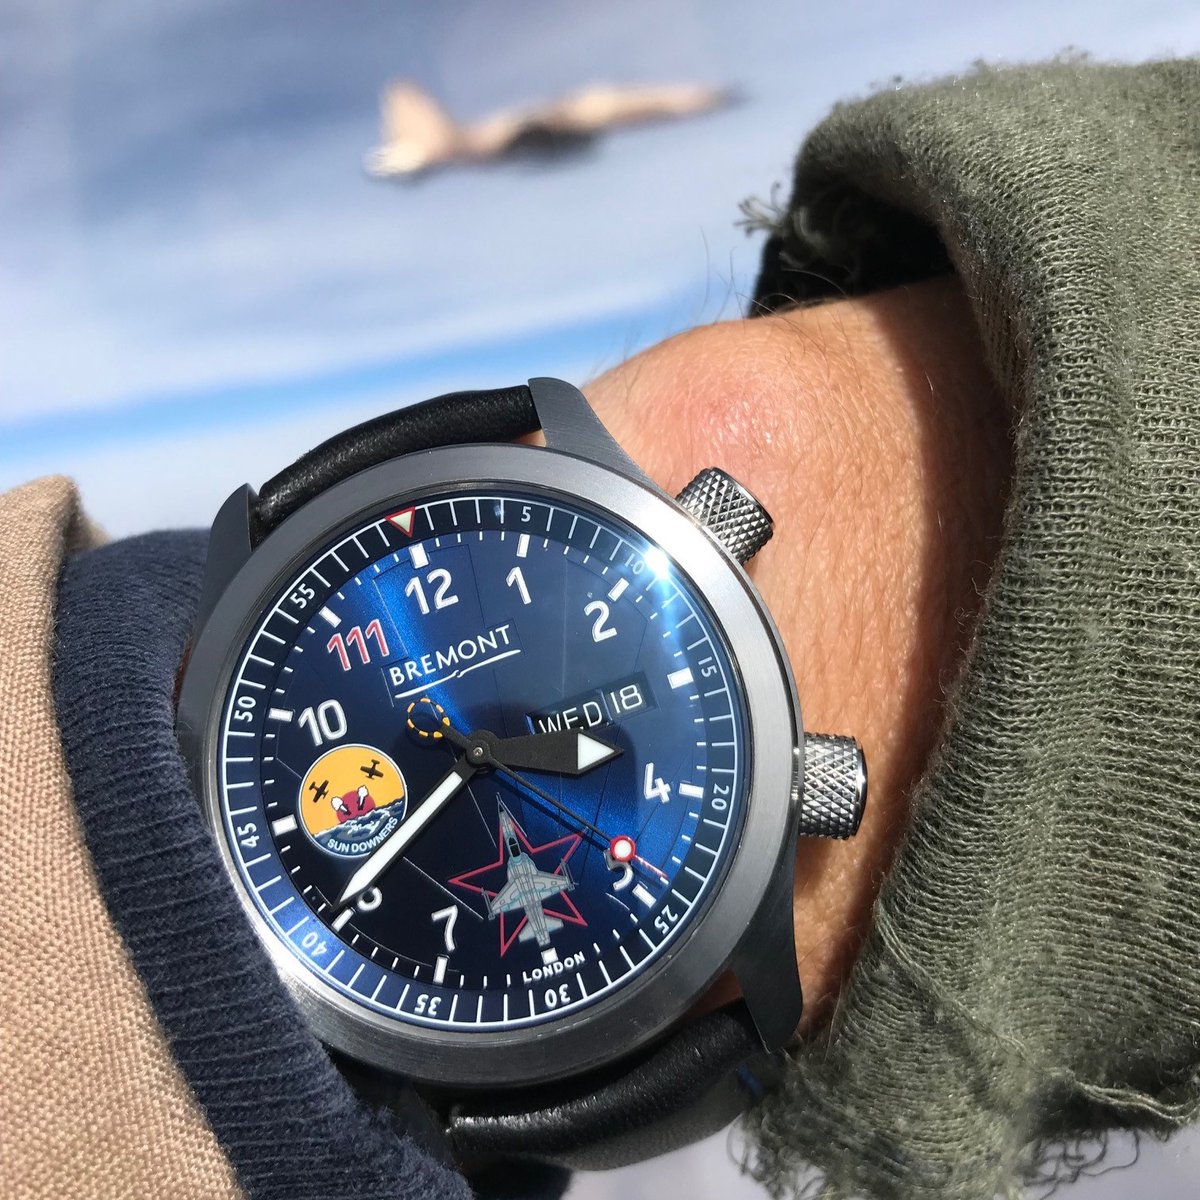 Spot the details behind the limited production Bremont MBII VFC-111 watch. Featuring their iconic nickname and crest, this timepiece is available exclusively to current or former VFC-111 members. To enquire, contact military@bremont.com. #Bremont #USNavy #SunDowners